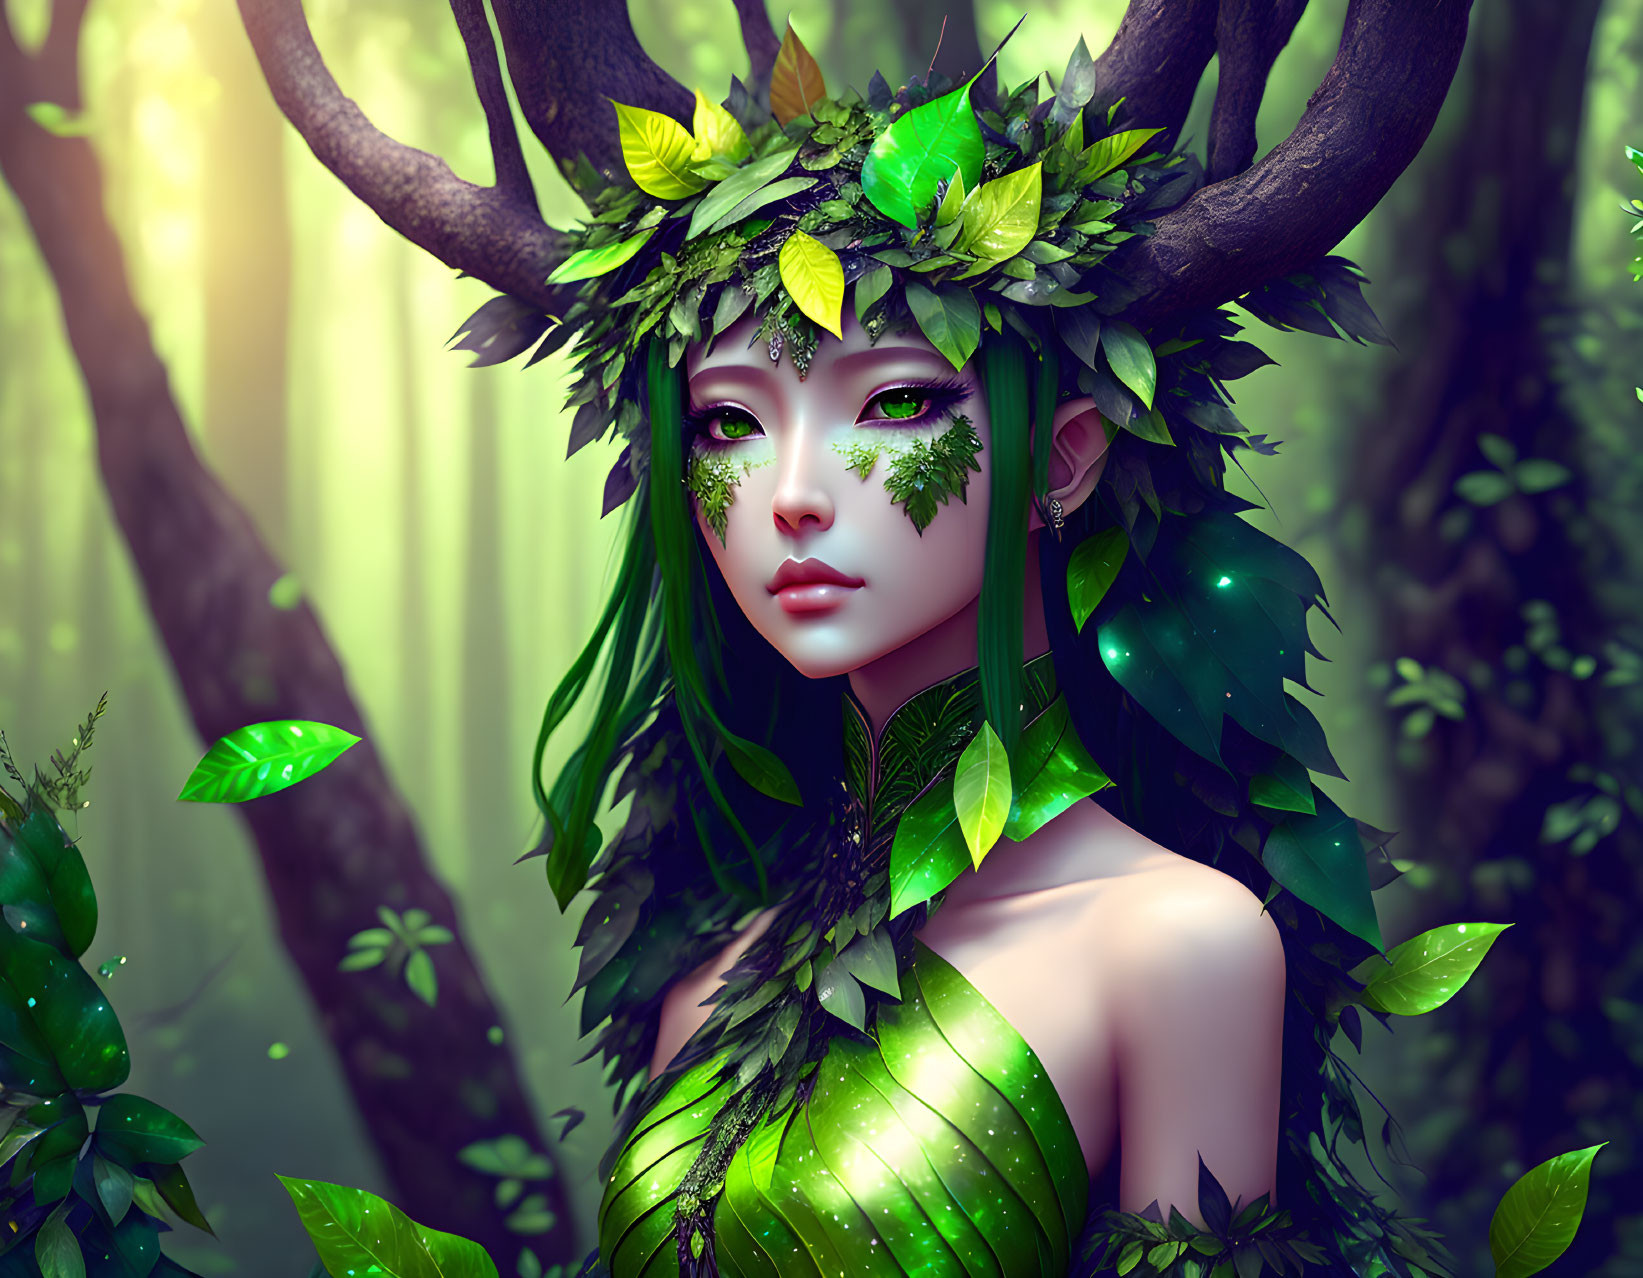 Fantastical image of woman with leaf crown in mystical forest